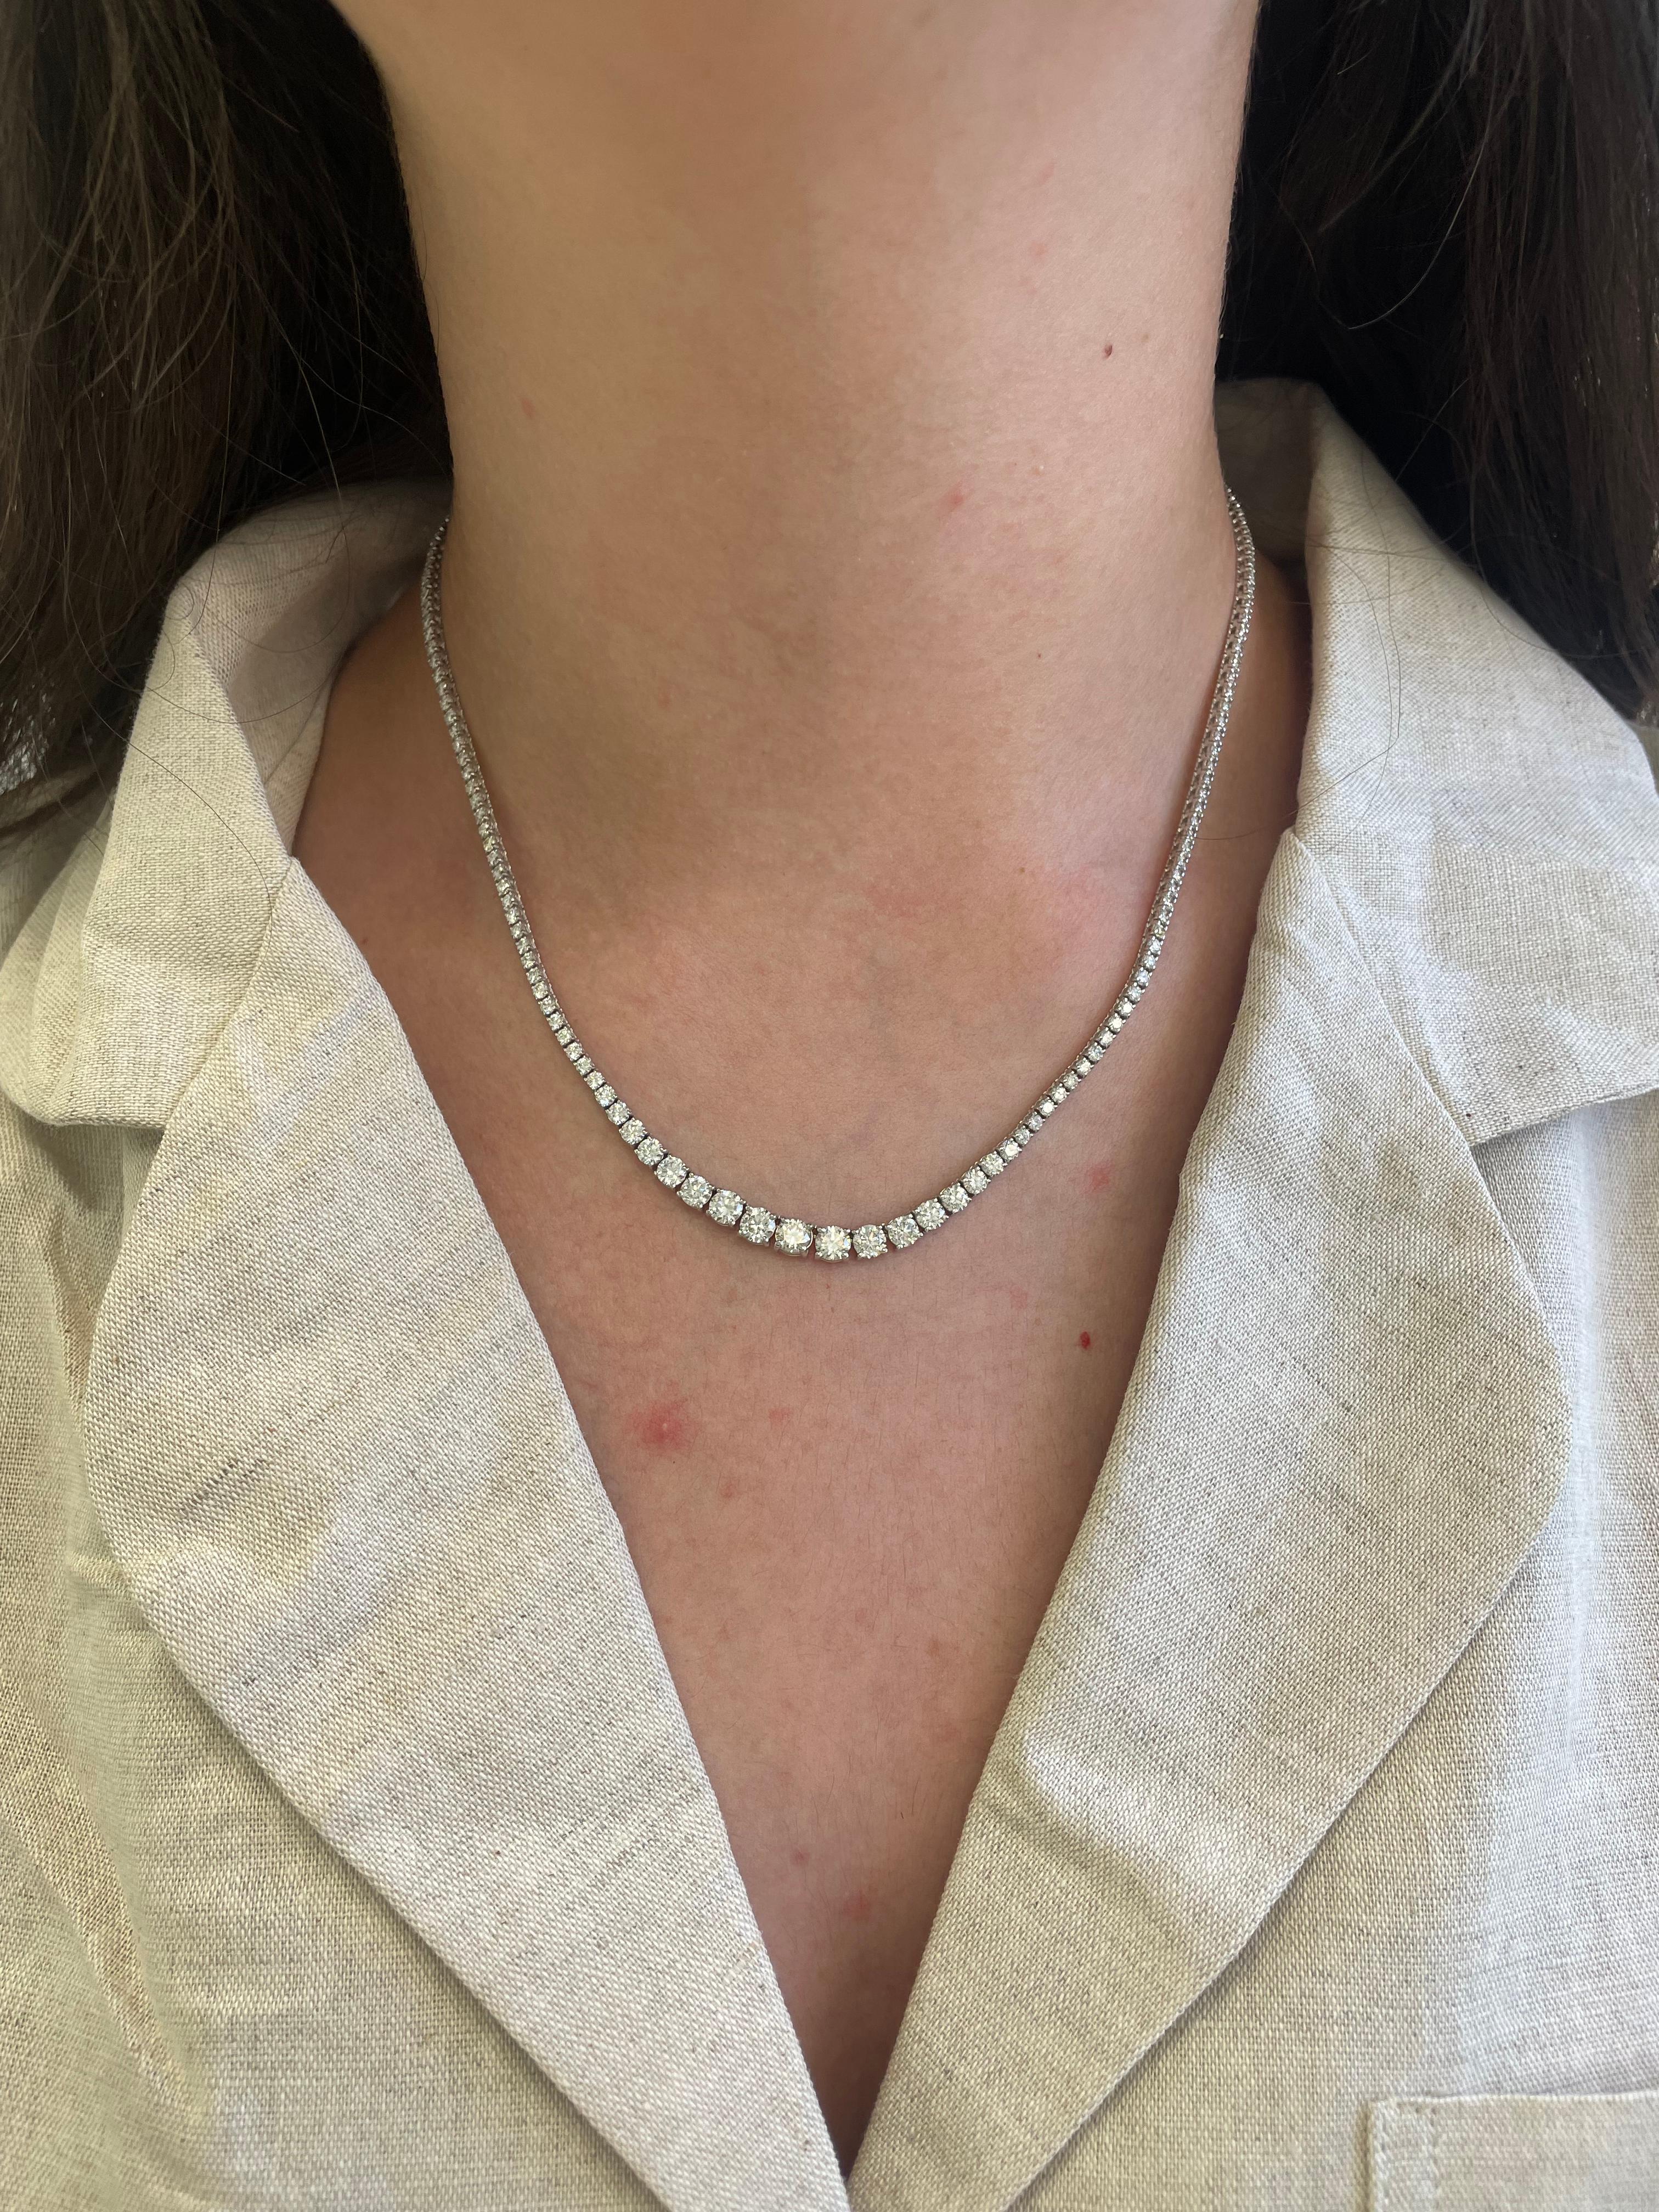 Beautiful and classic diamond tennis riviera necklace, by Alexander Beverly Hills.
169 round brilliant diamonds, 7.55 carats. Approximately G-H color and VS clarity. 18k white gold, 15.66 grams, 16n.
Accommodated with an up-to-date appraisal by a